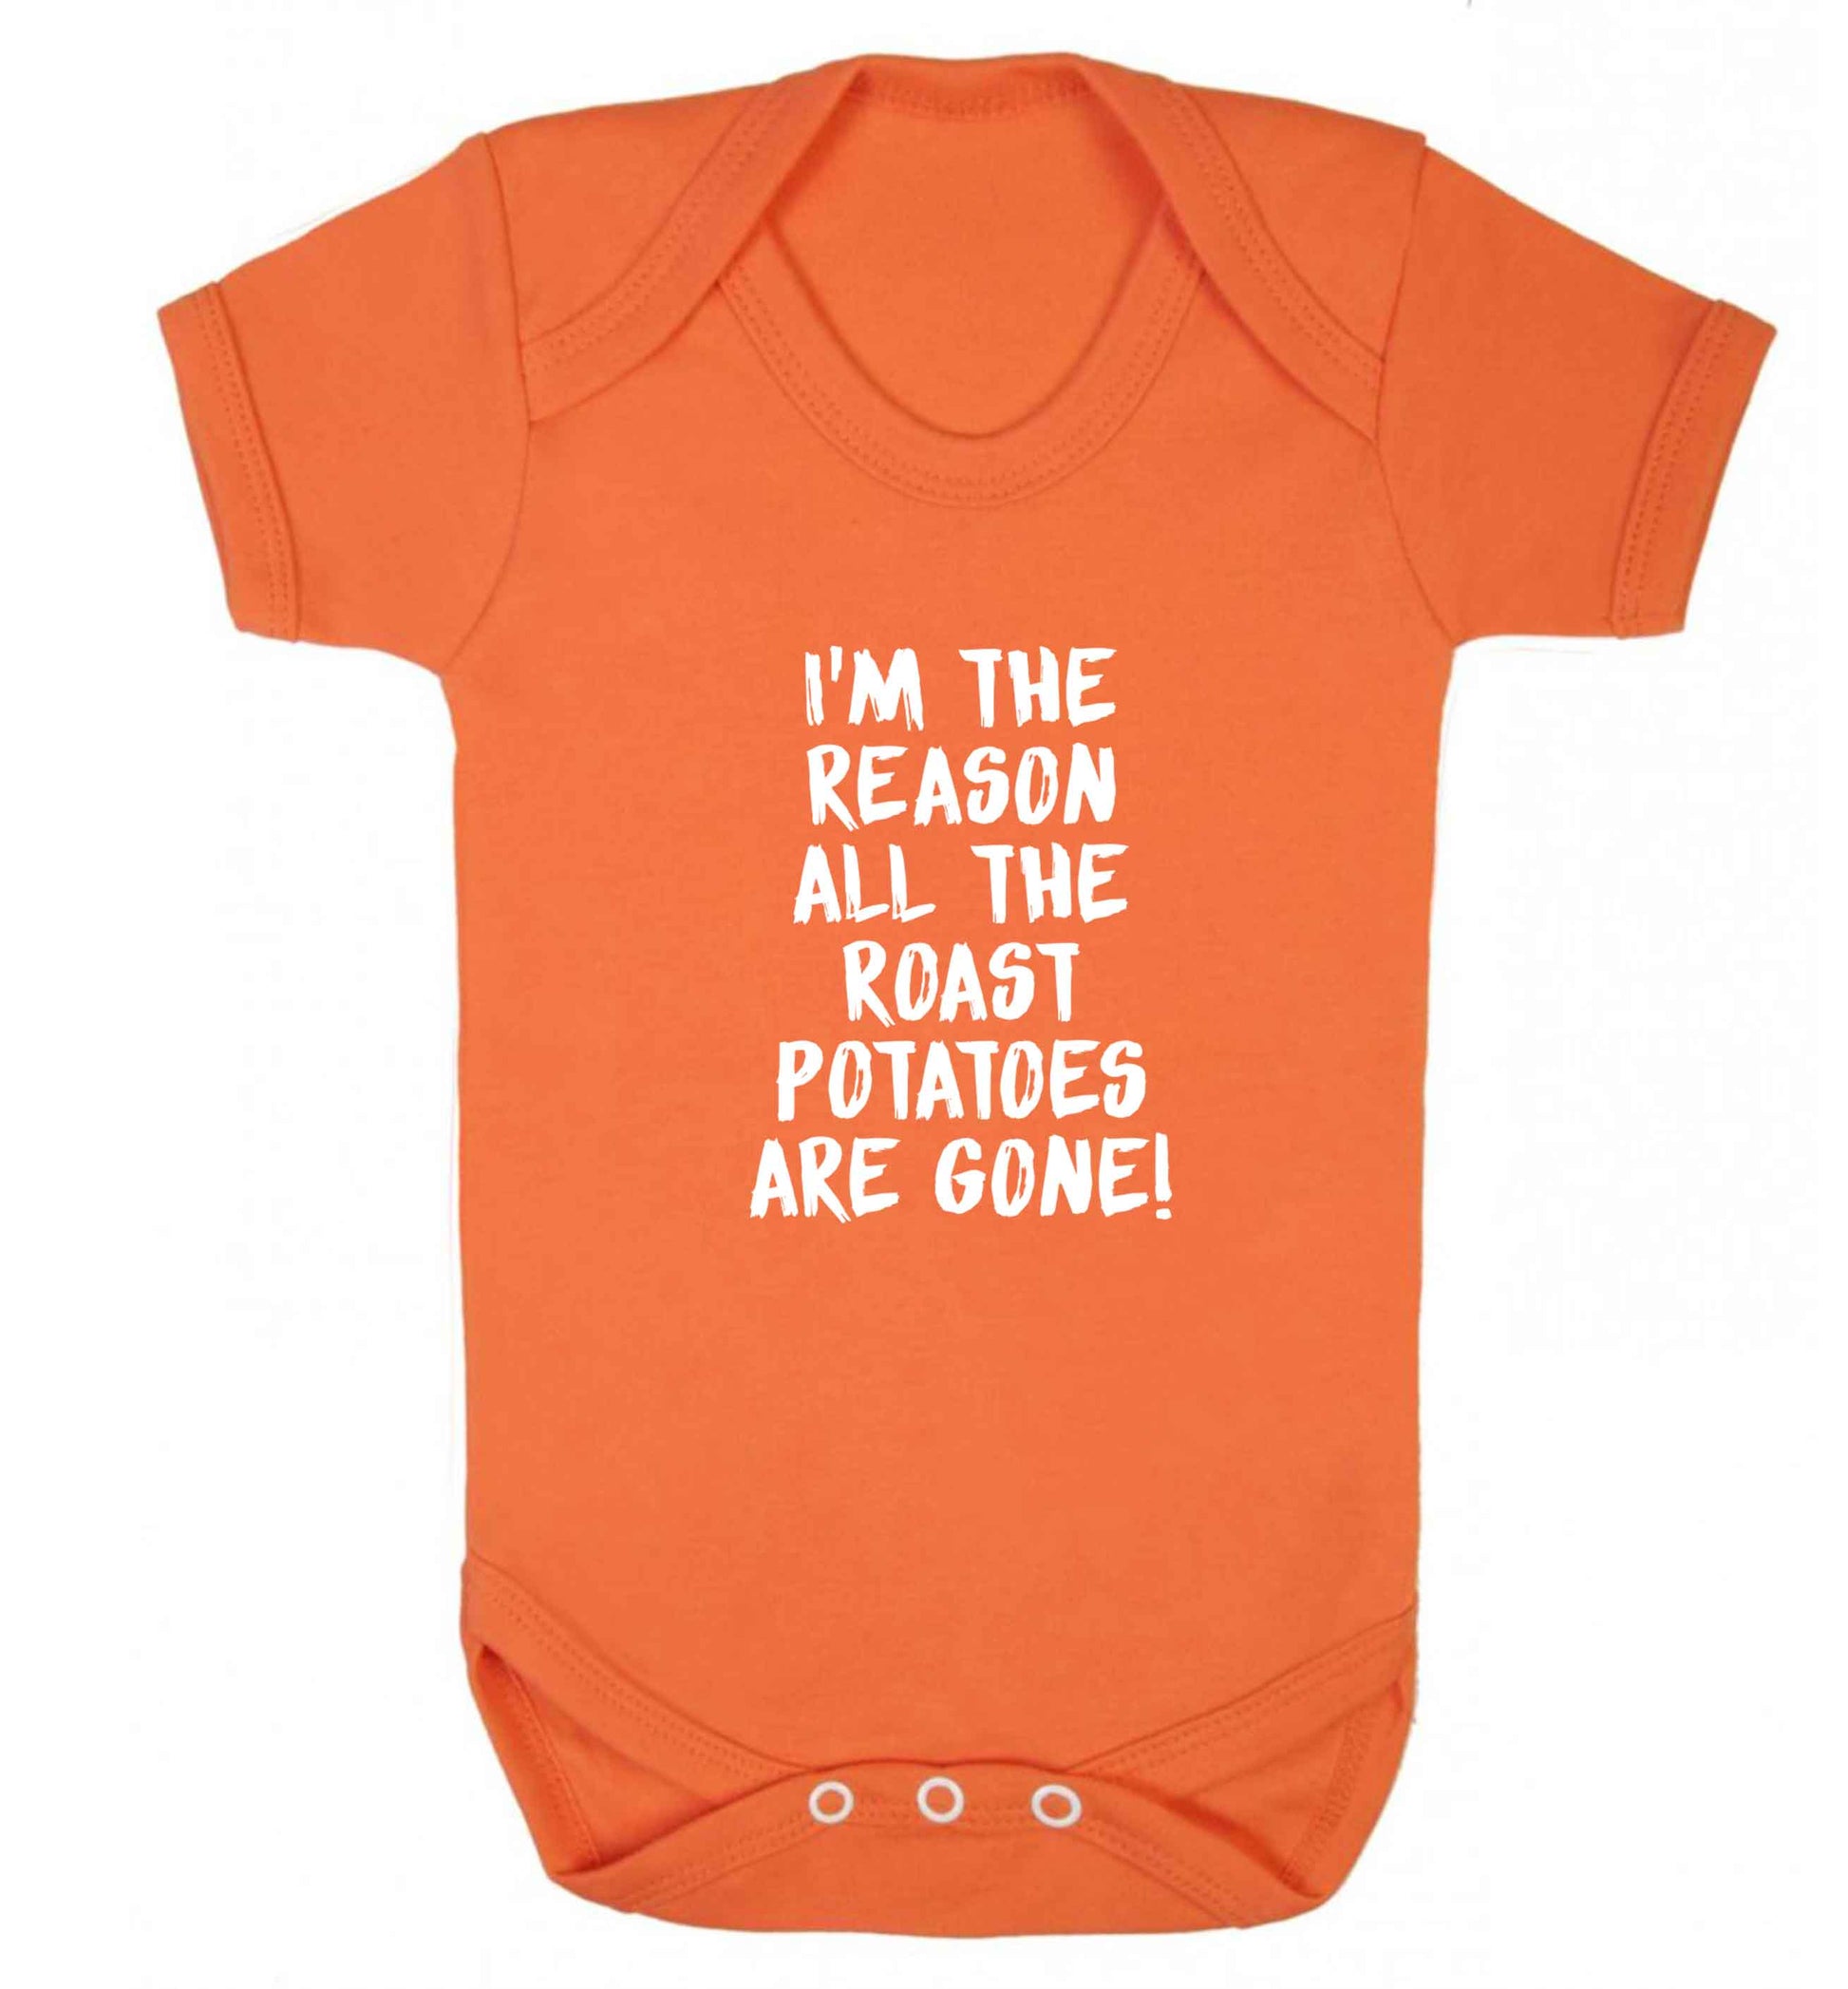 I'm the reason all the roast potatoes are gone baby vest orange 18-24 months